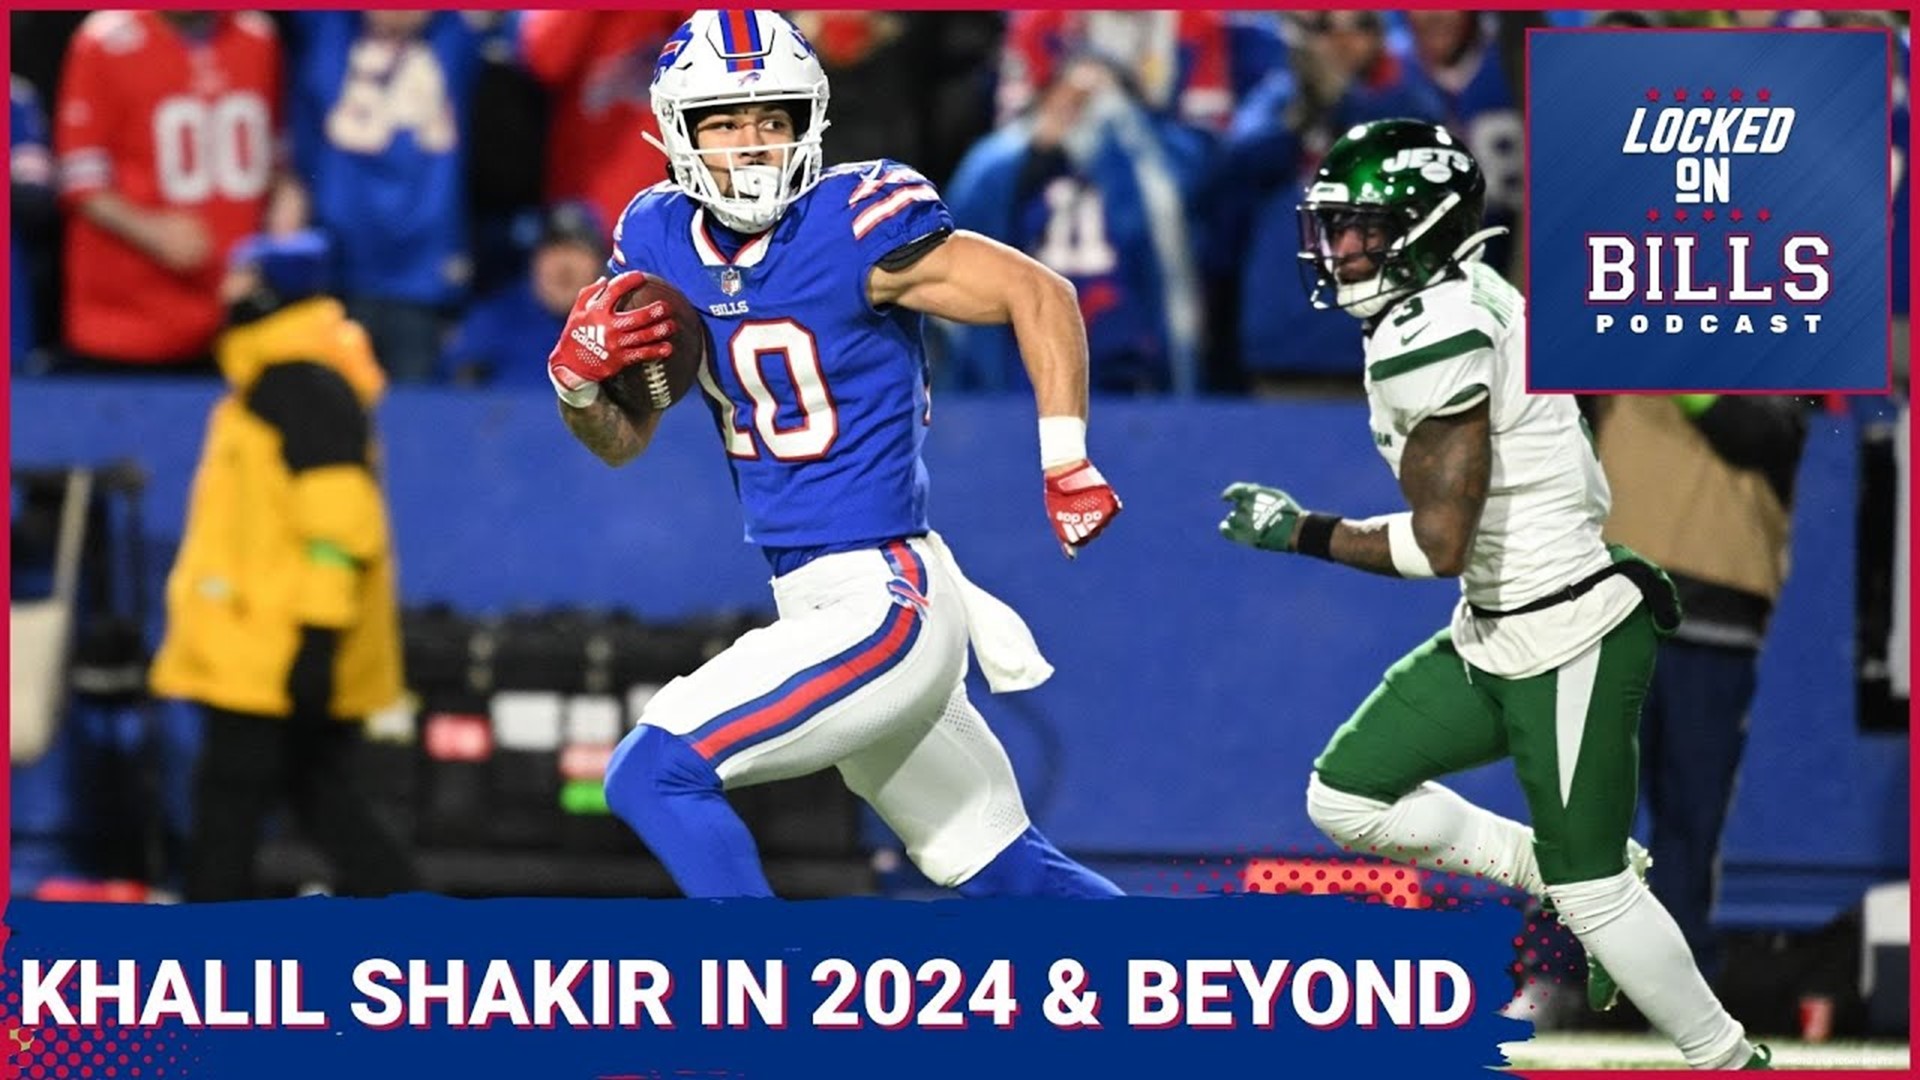 What to expect Khalil Shakir in Buffalo Bills offense with Josh Allen in 2024 and beyond